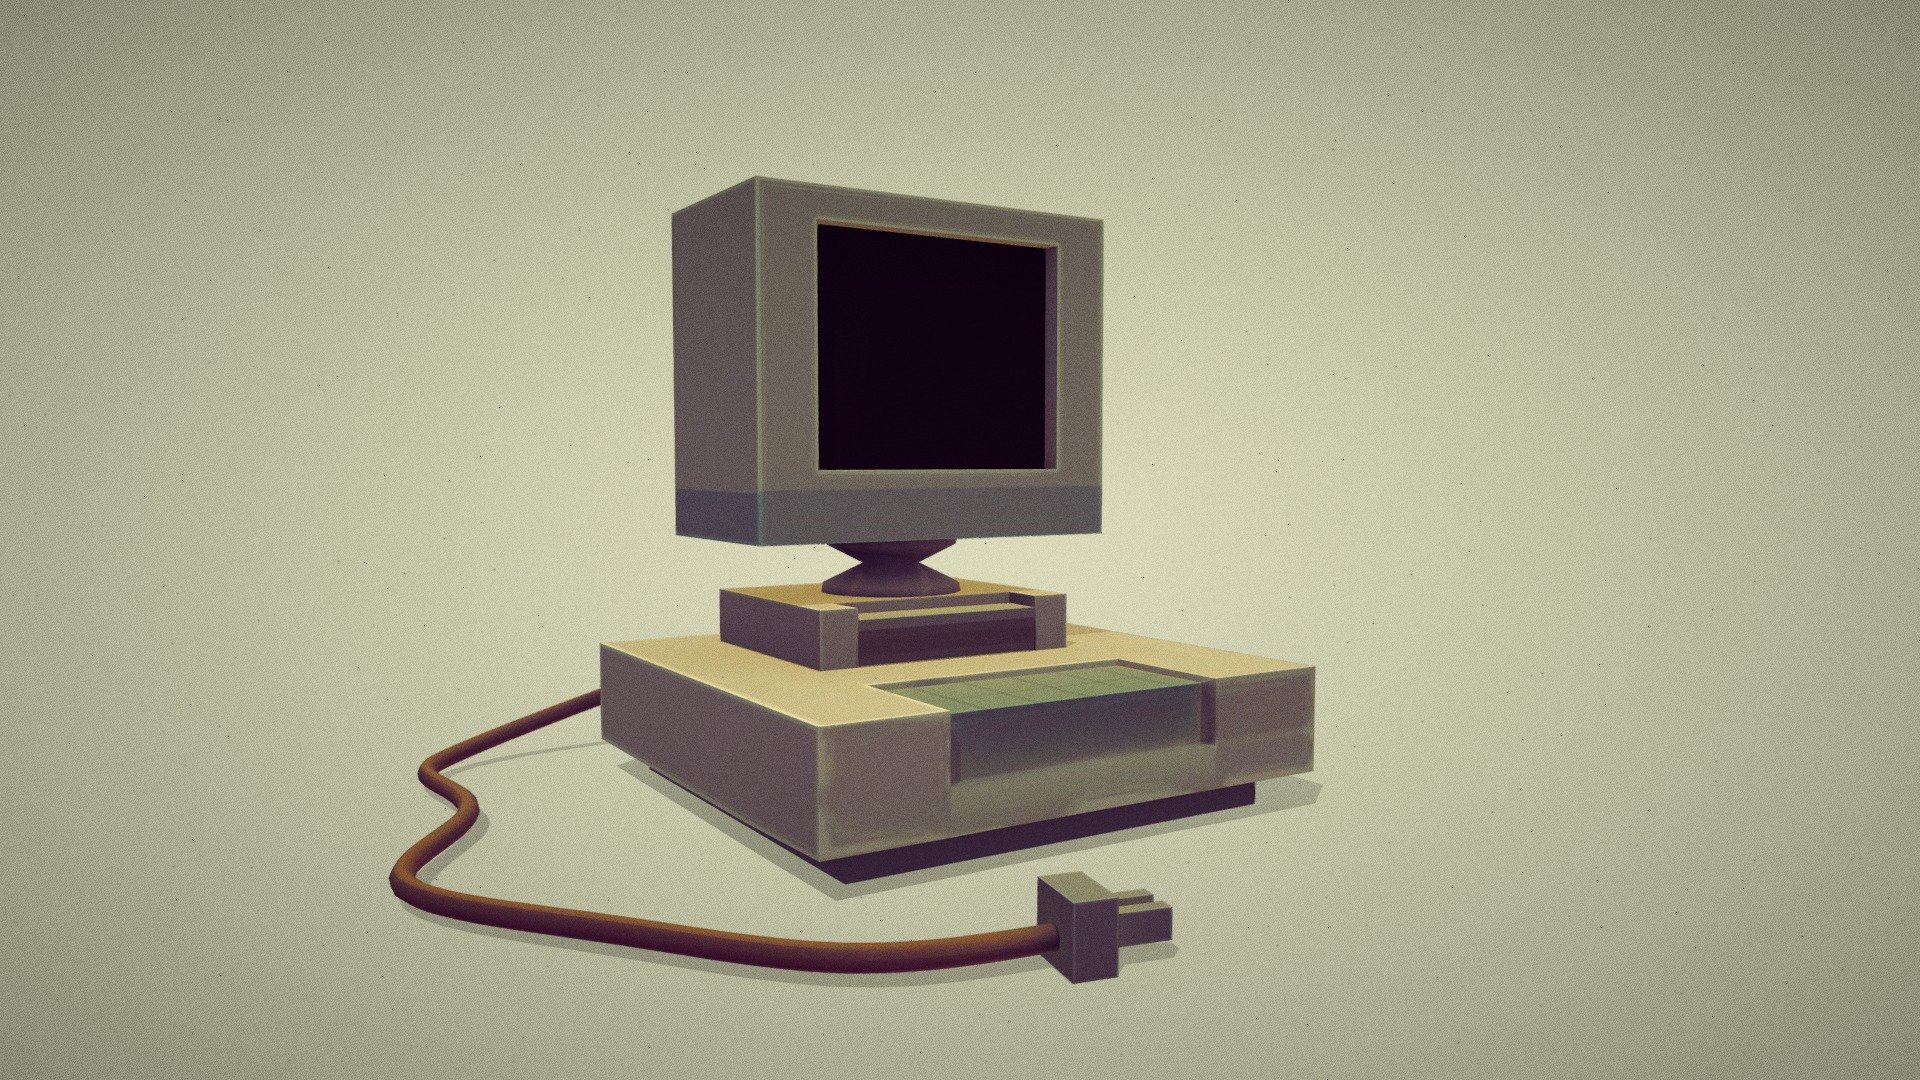 Low Poly Computer Download Free 3d Model By Glcalde D62ac72 Sketchfab